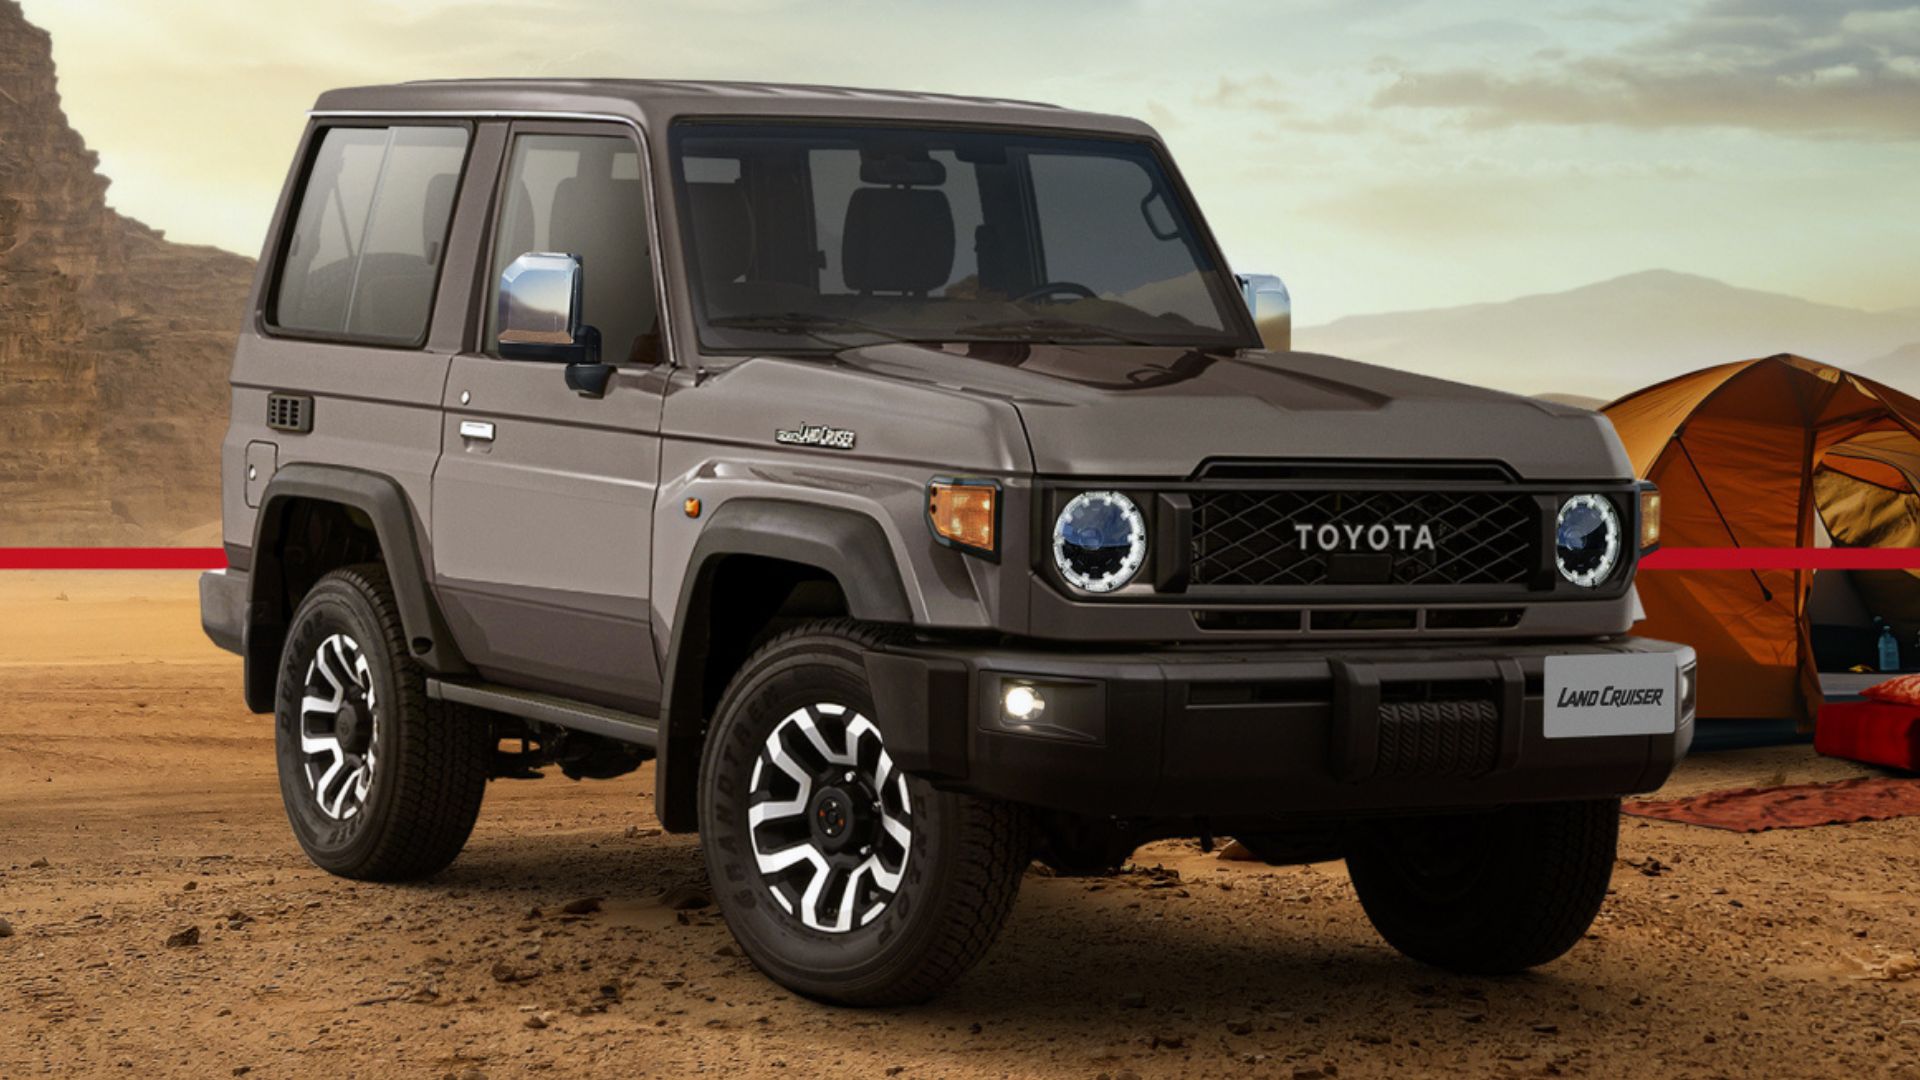 Toyota Re-introduces the Land Cruiser 70 in Japan